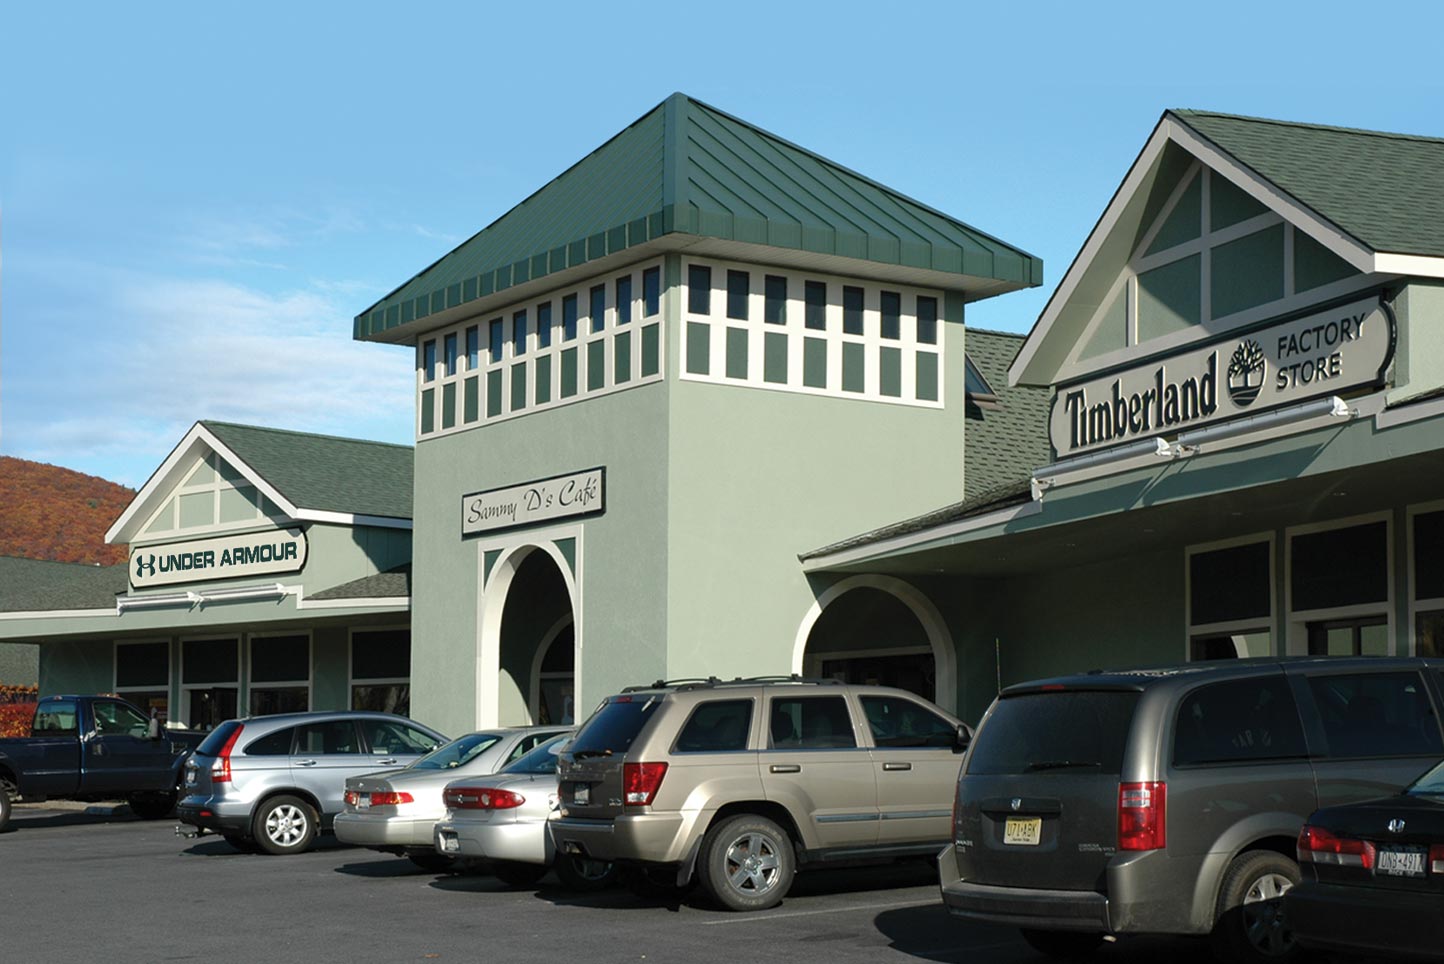 Adirondack Outlet Mall in Lake George